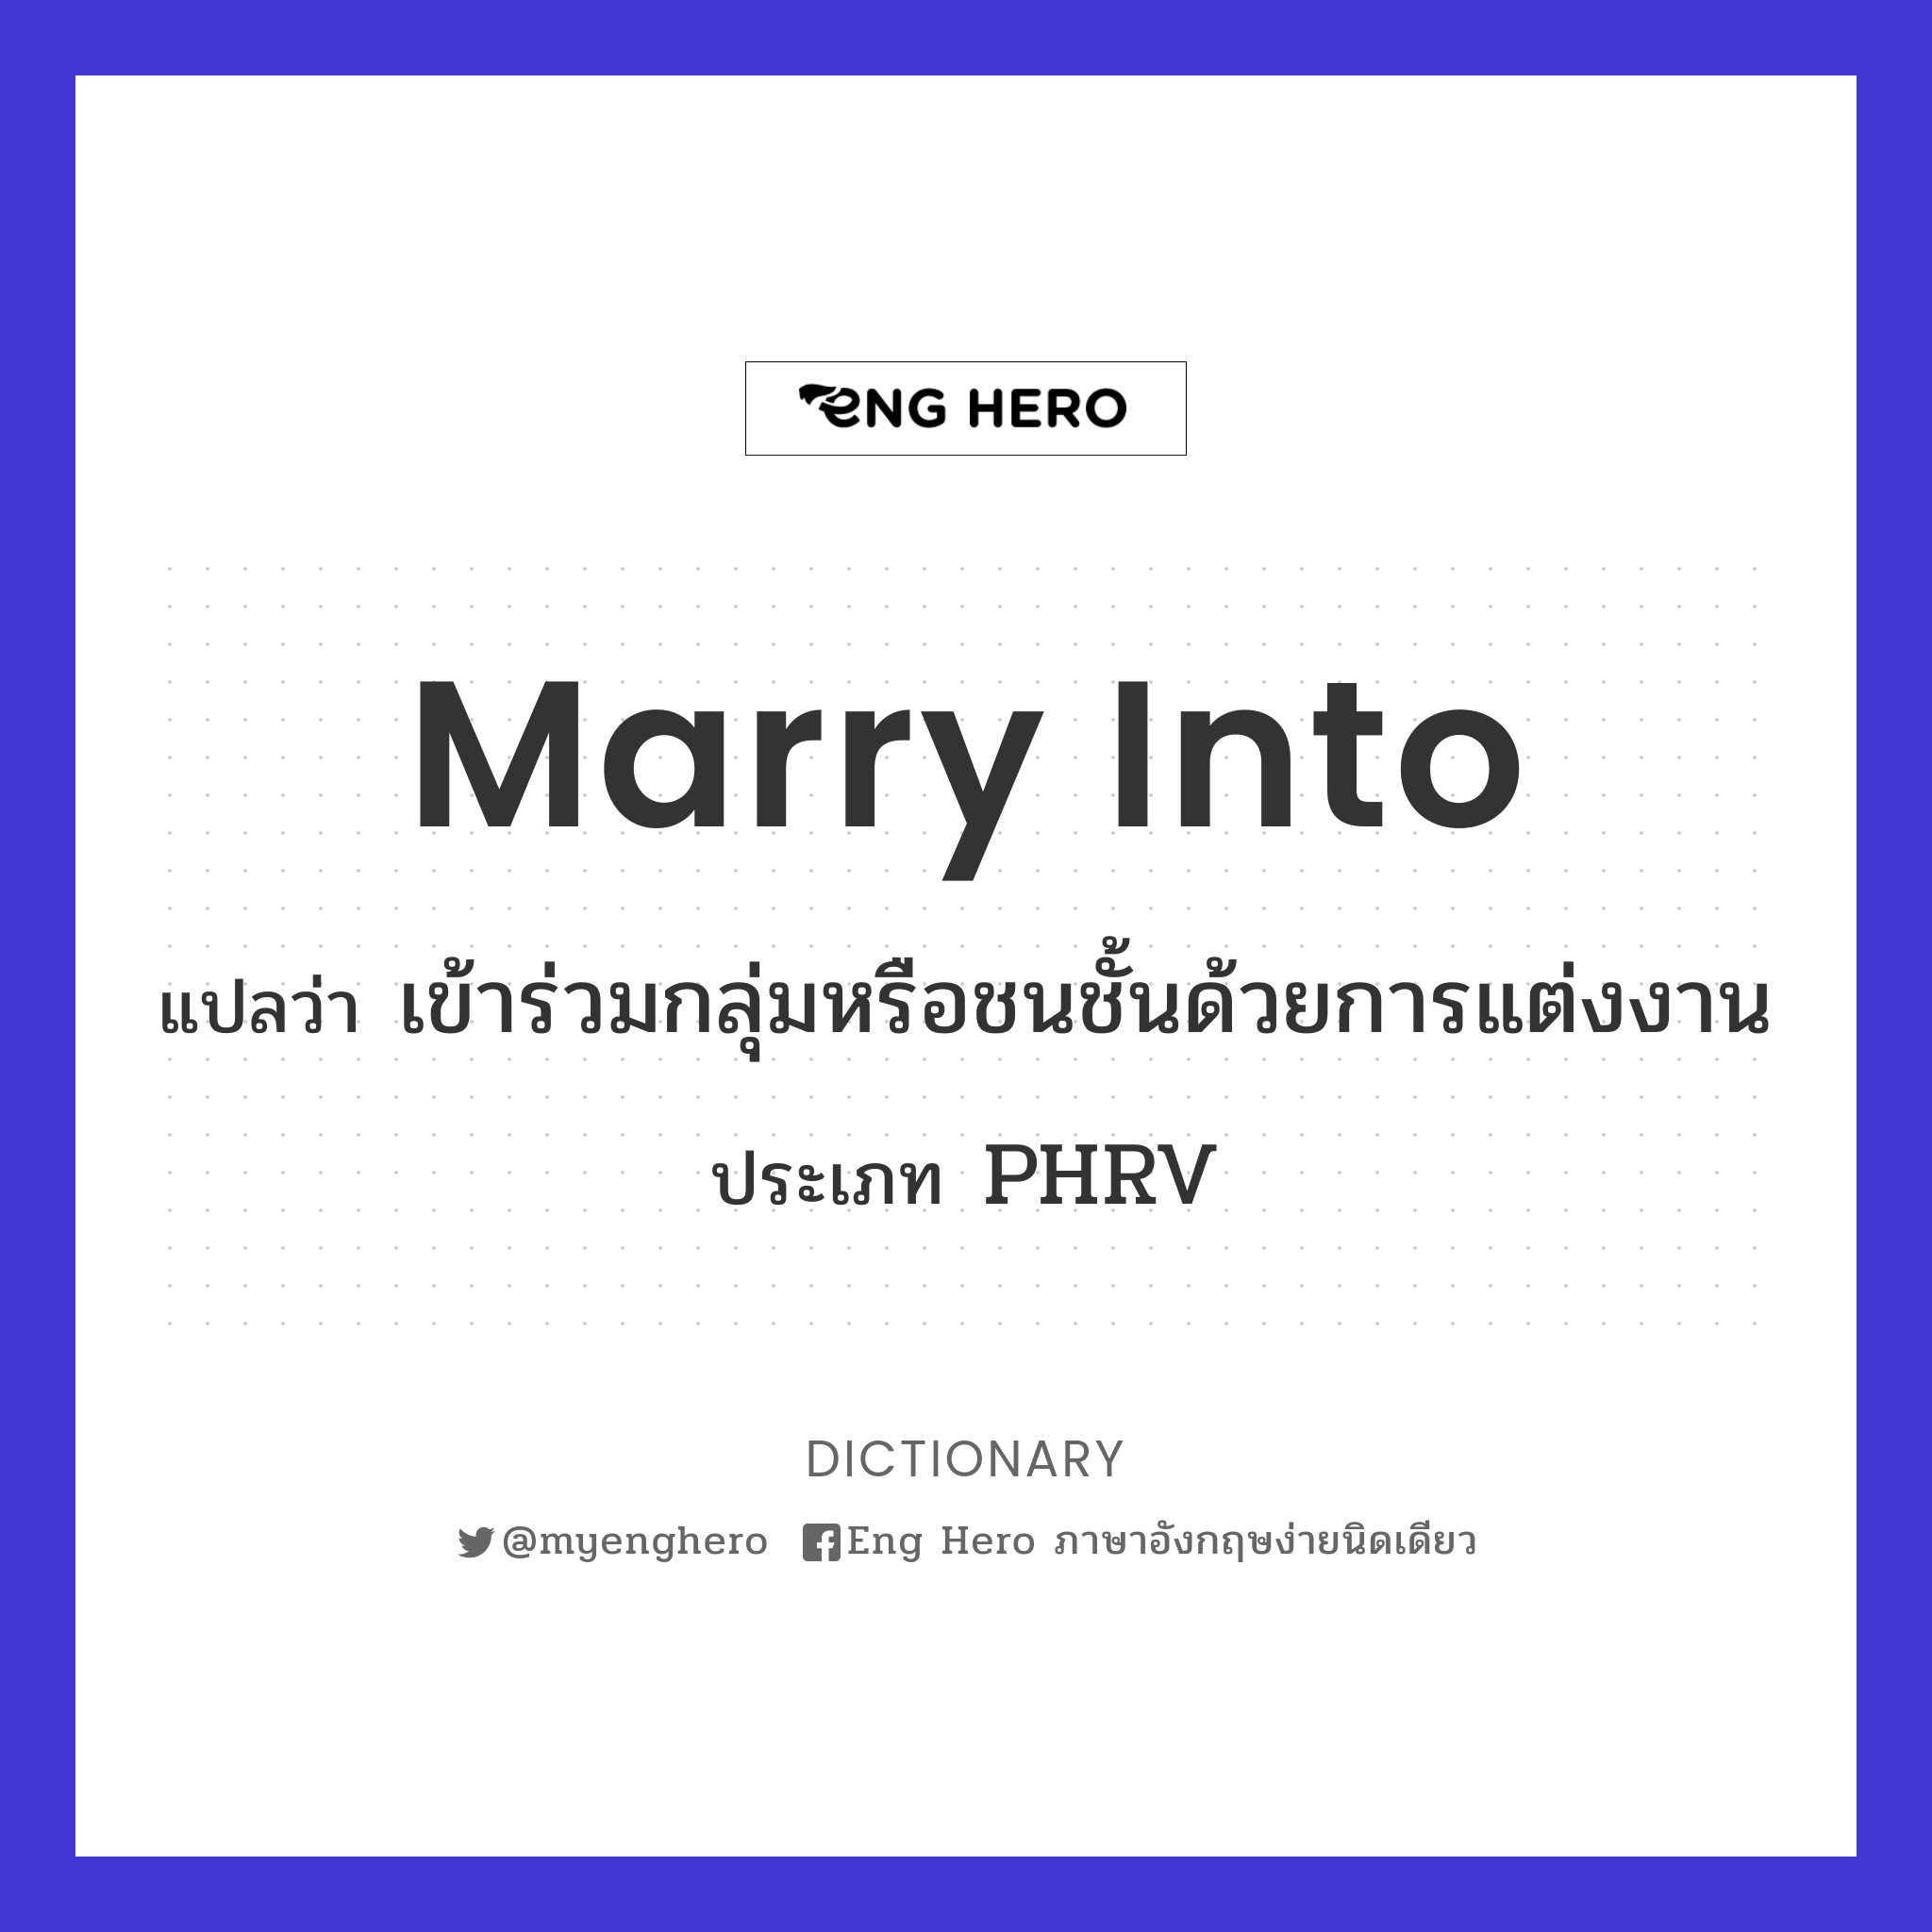 marry into